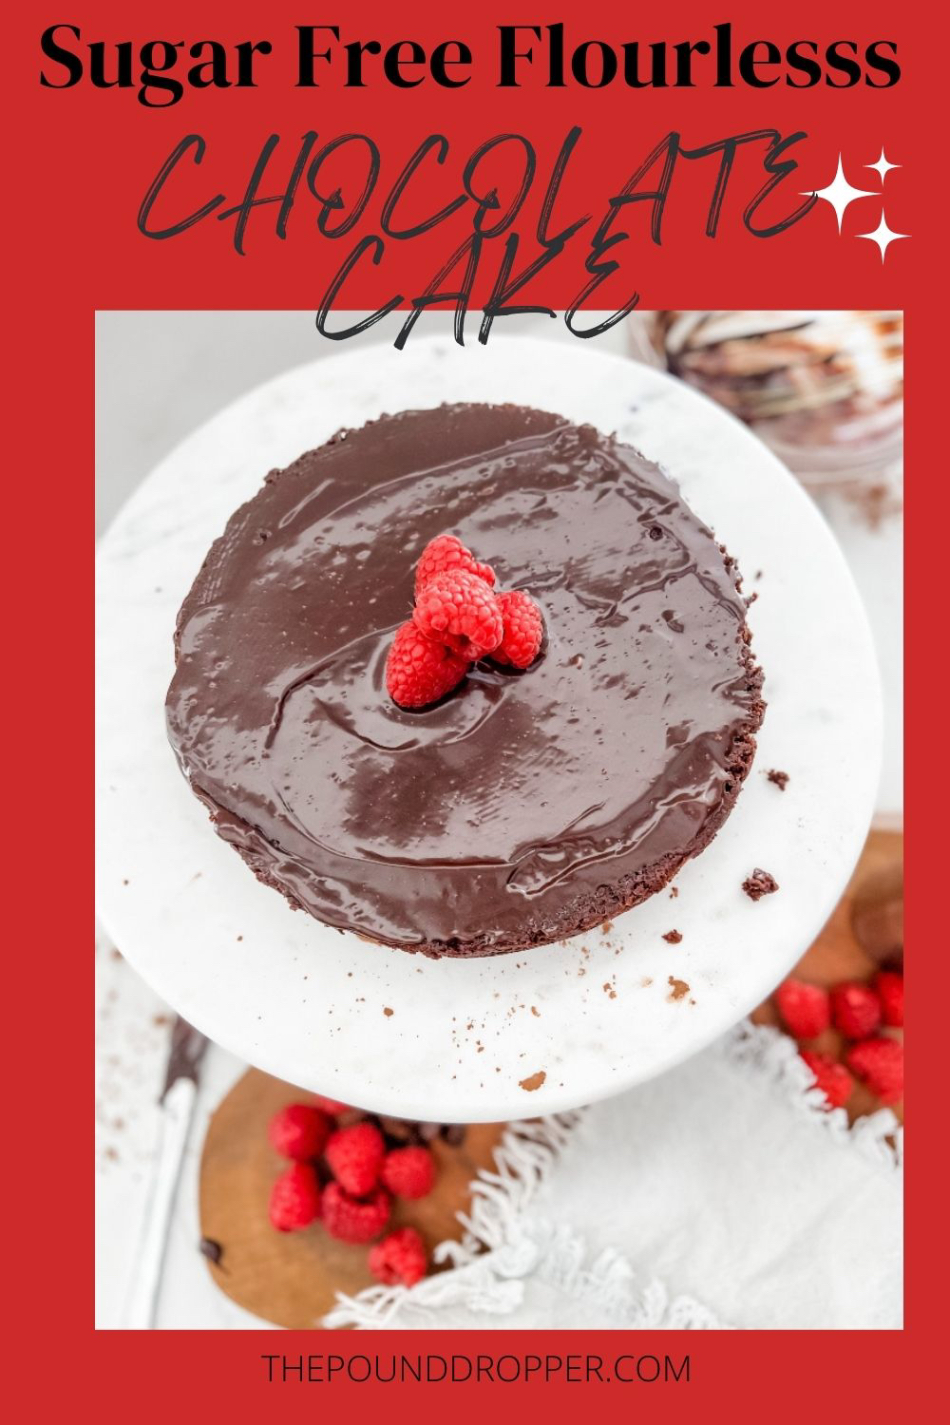 This Sugar Free Flourless Chocolate Cake is a chocolate lover’s dream- and the ultimate chocolatey, rich, decadent, sugarless, flourless chocolate cake you’ll ever make! This makes for the best Valentine's Day dessert! via @pounddropper